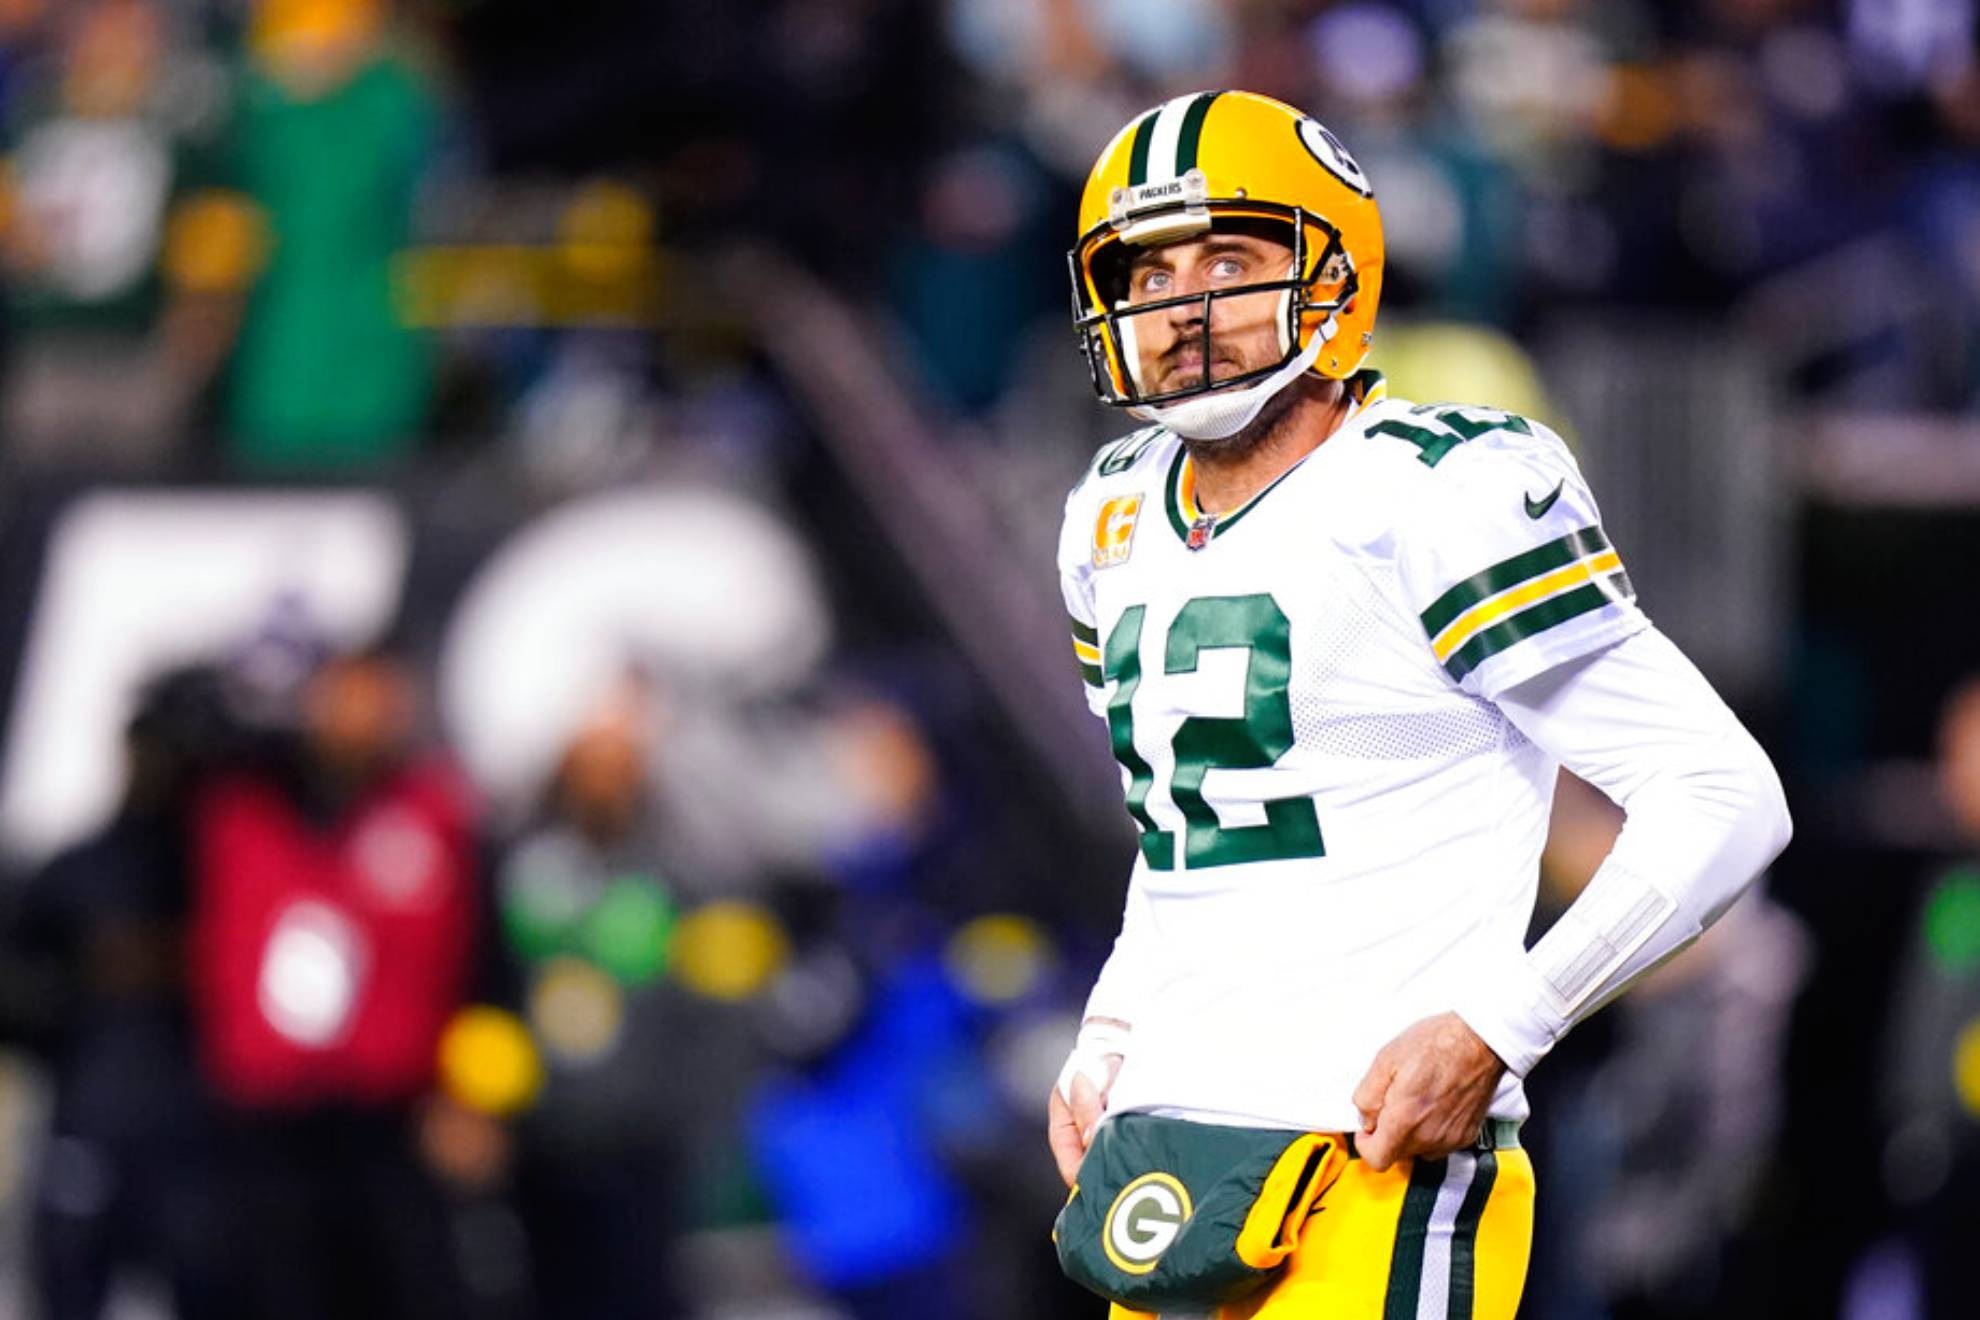 Rodgers injures ribs in Packers' loss to Eagles; had "hard time breathing"